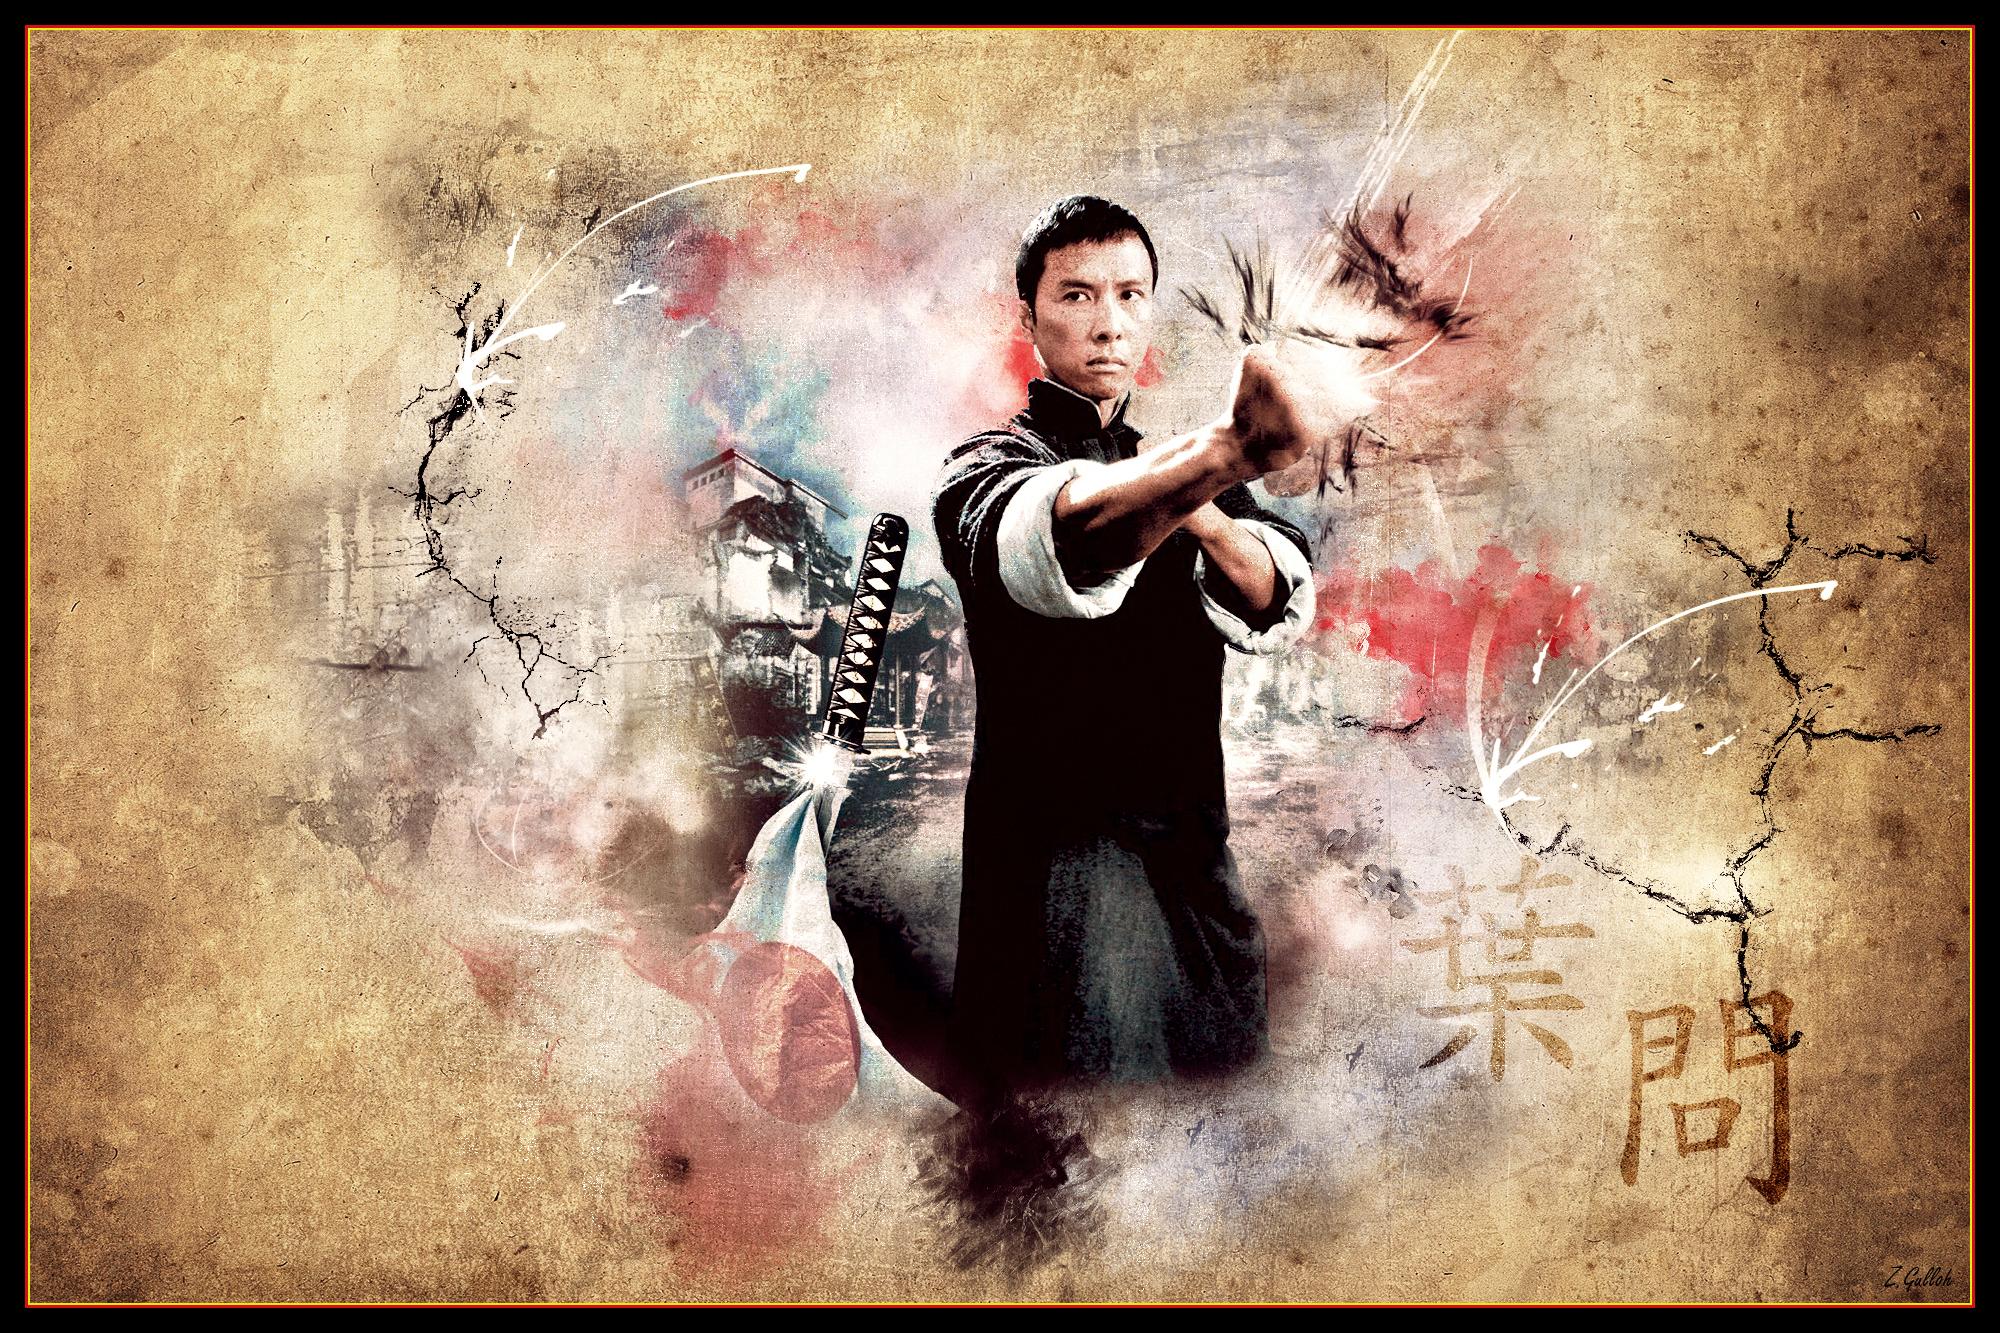 2 Ip Man HD Wallpapers | Backgrounds - Wallpaper Abyss